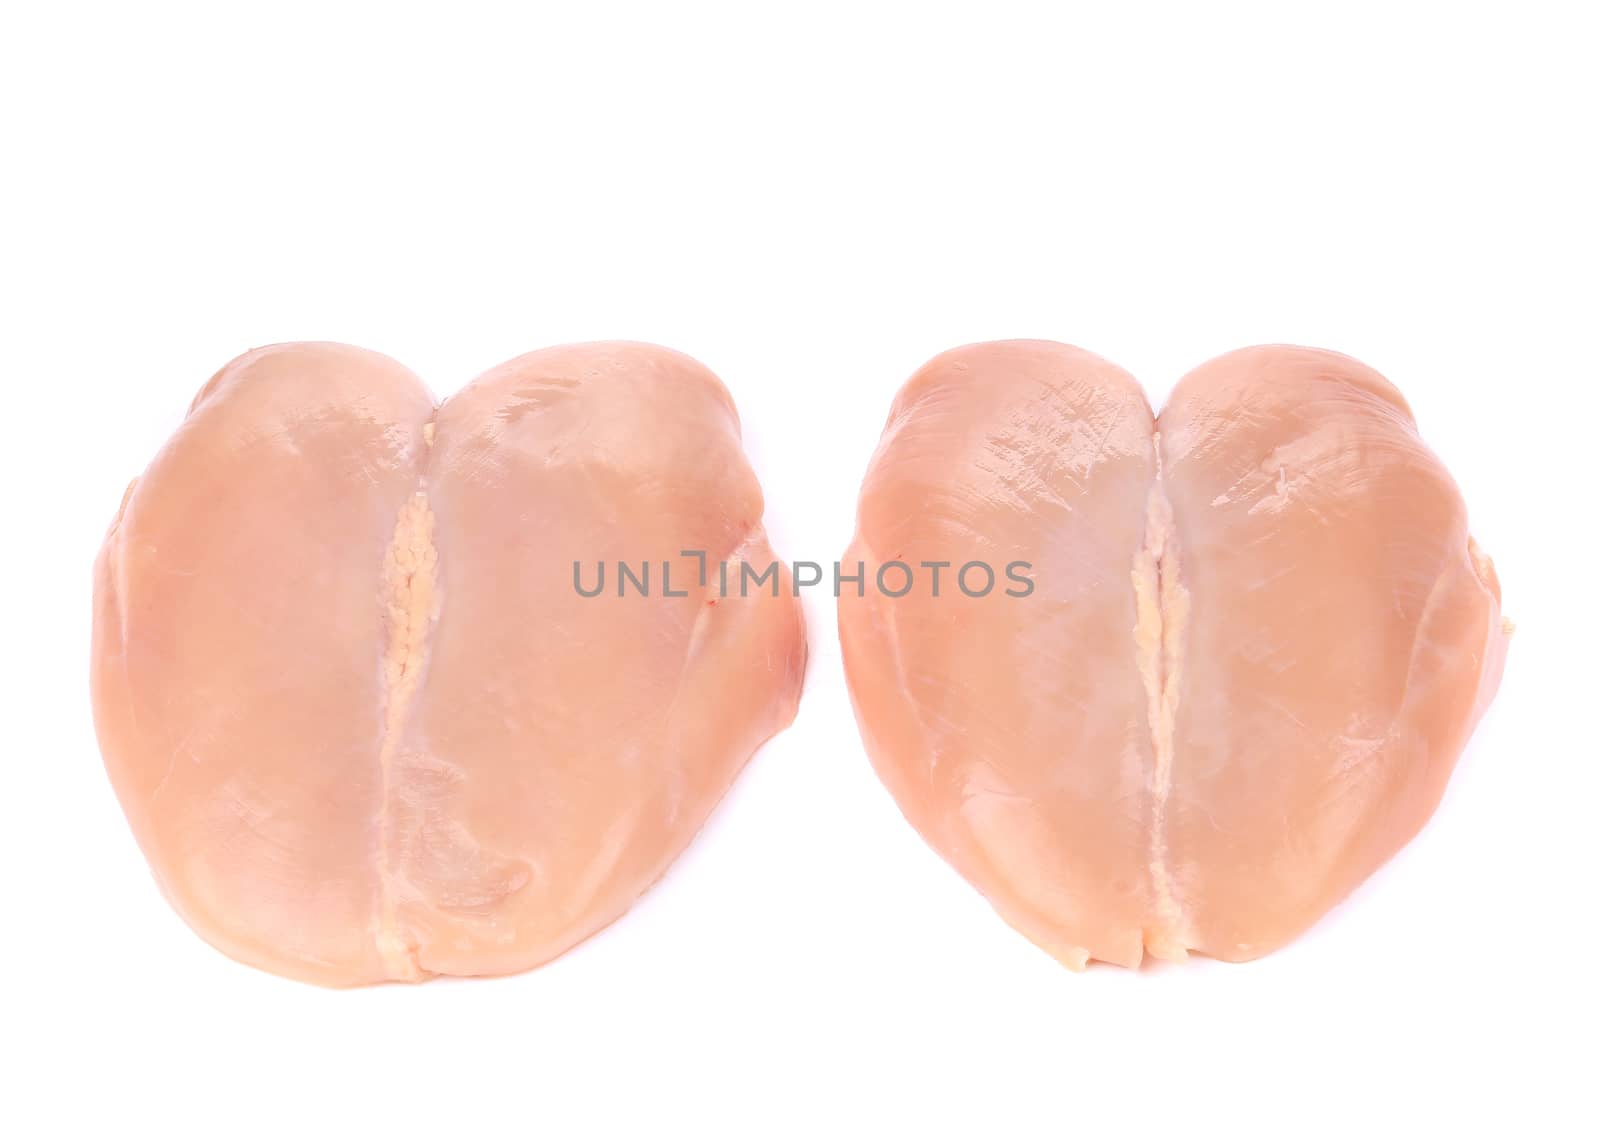 Raw chicken fillets. Isolated on a white background.